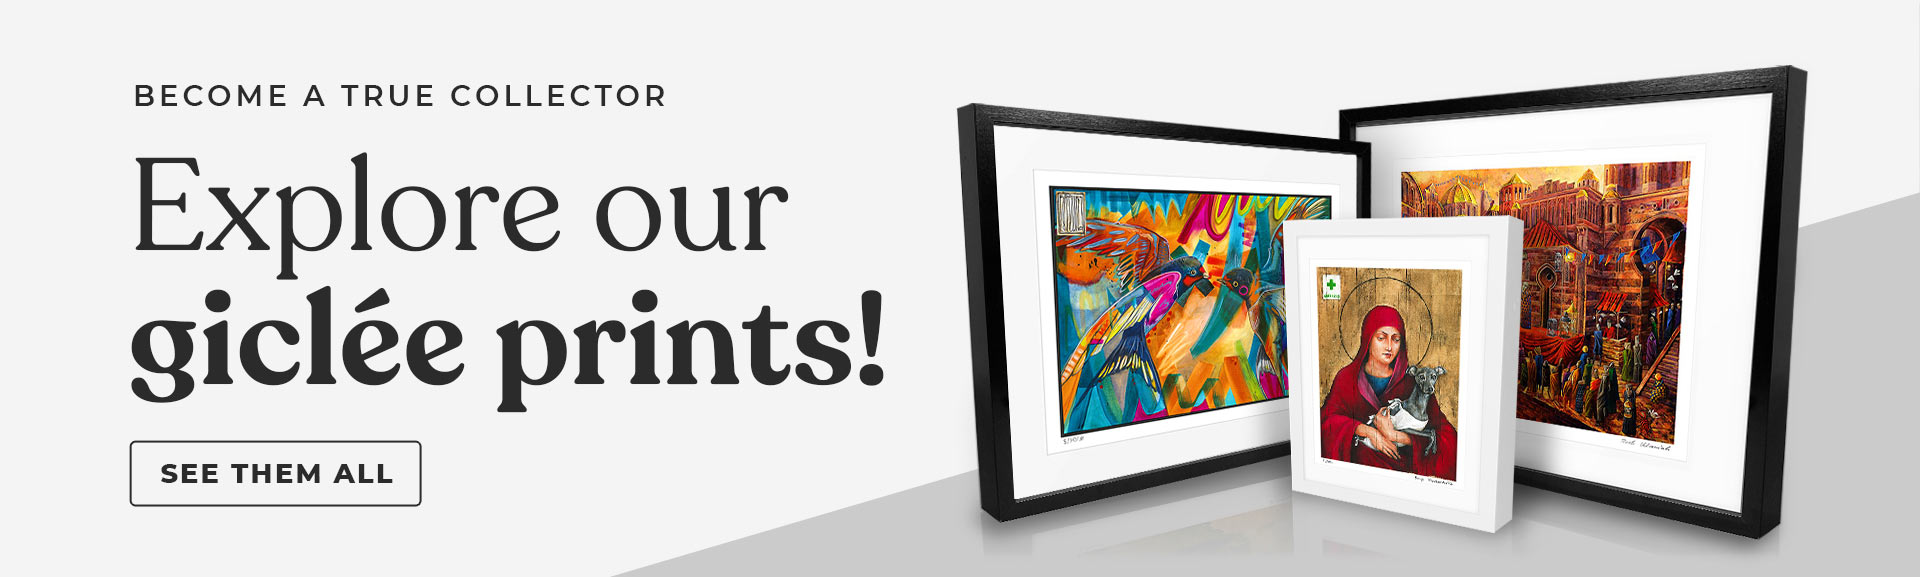 Explore our Giclee prints